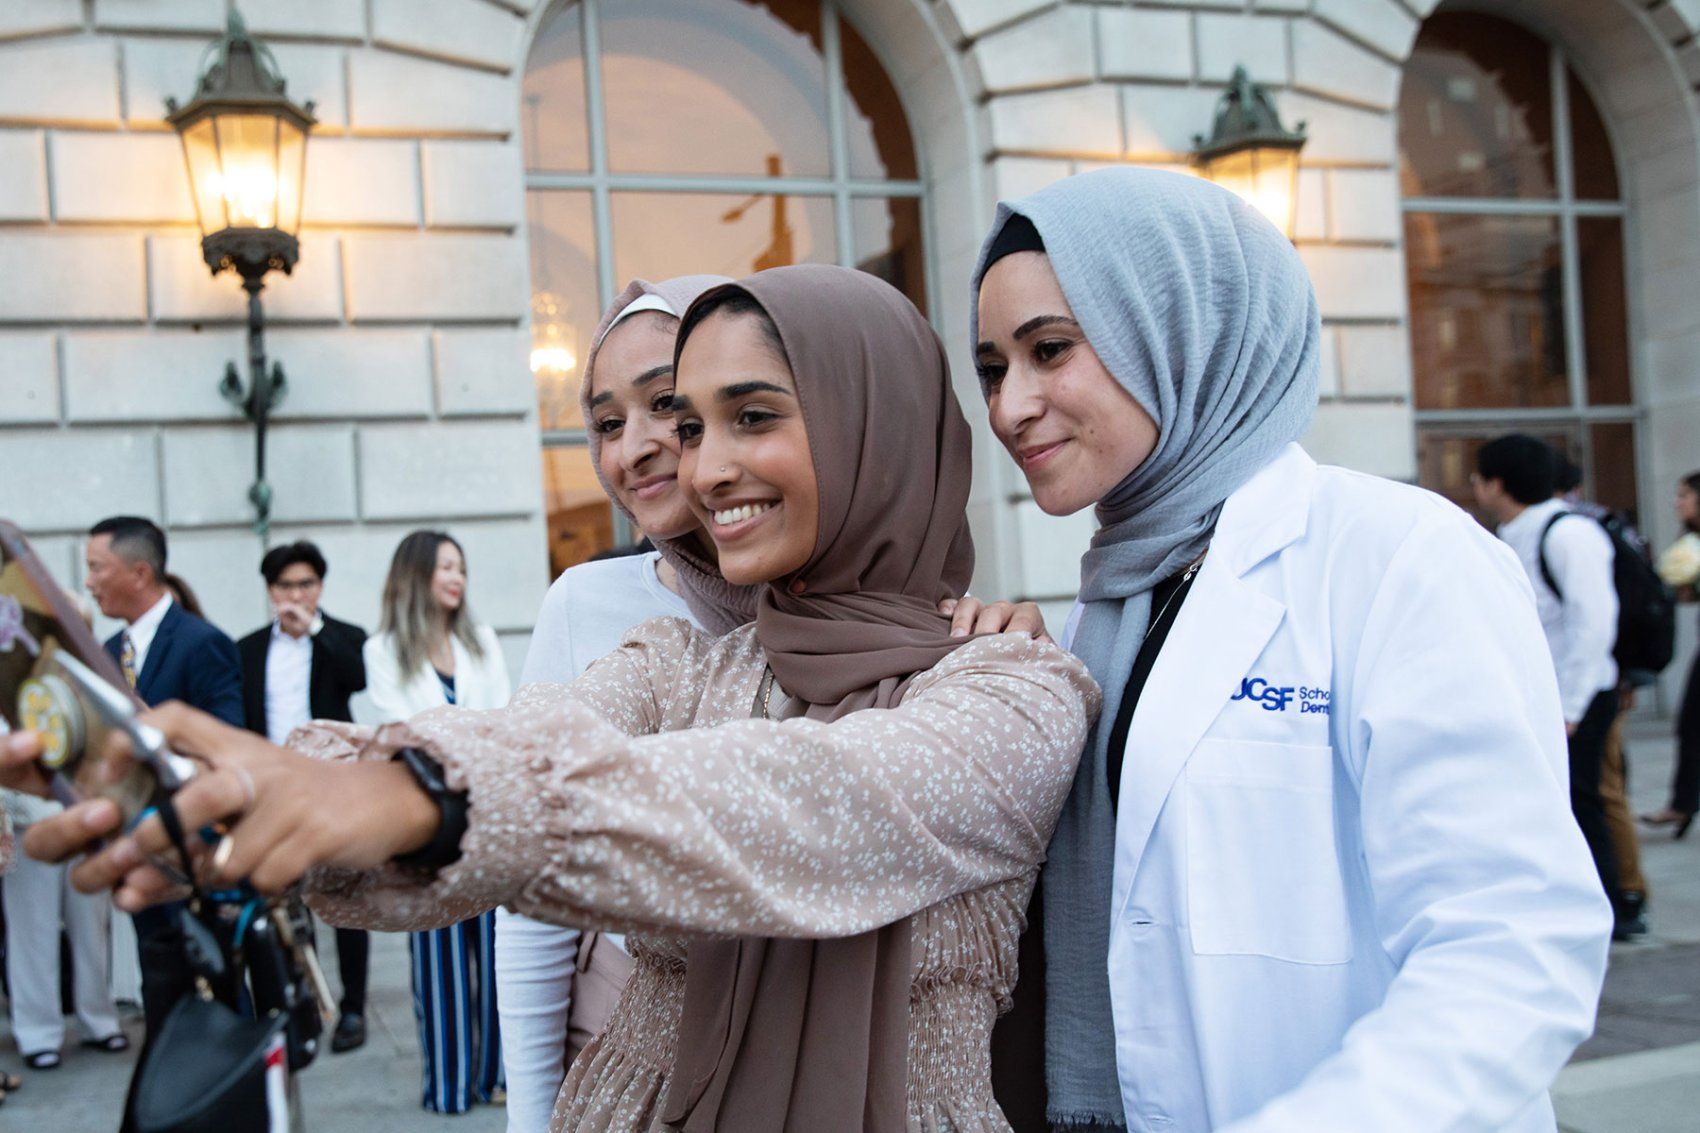 A new dentistry student on the right poses with two women for a selfie